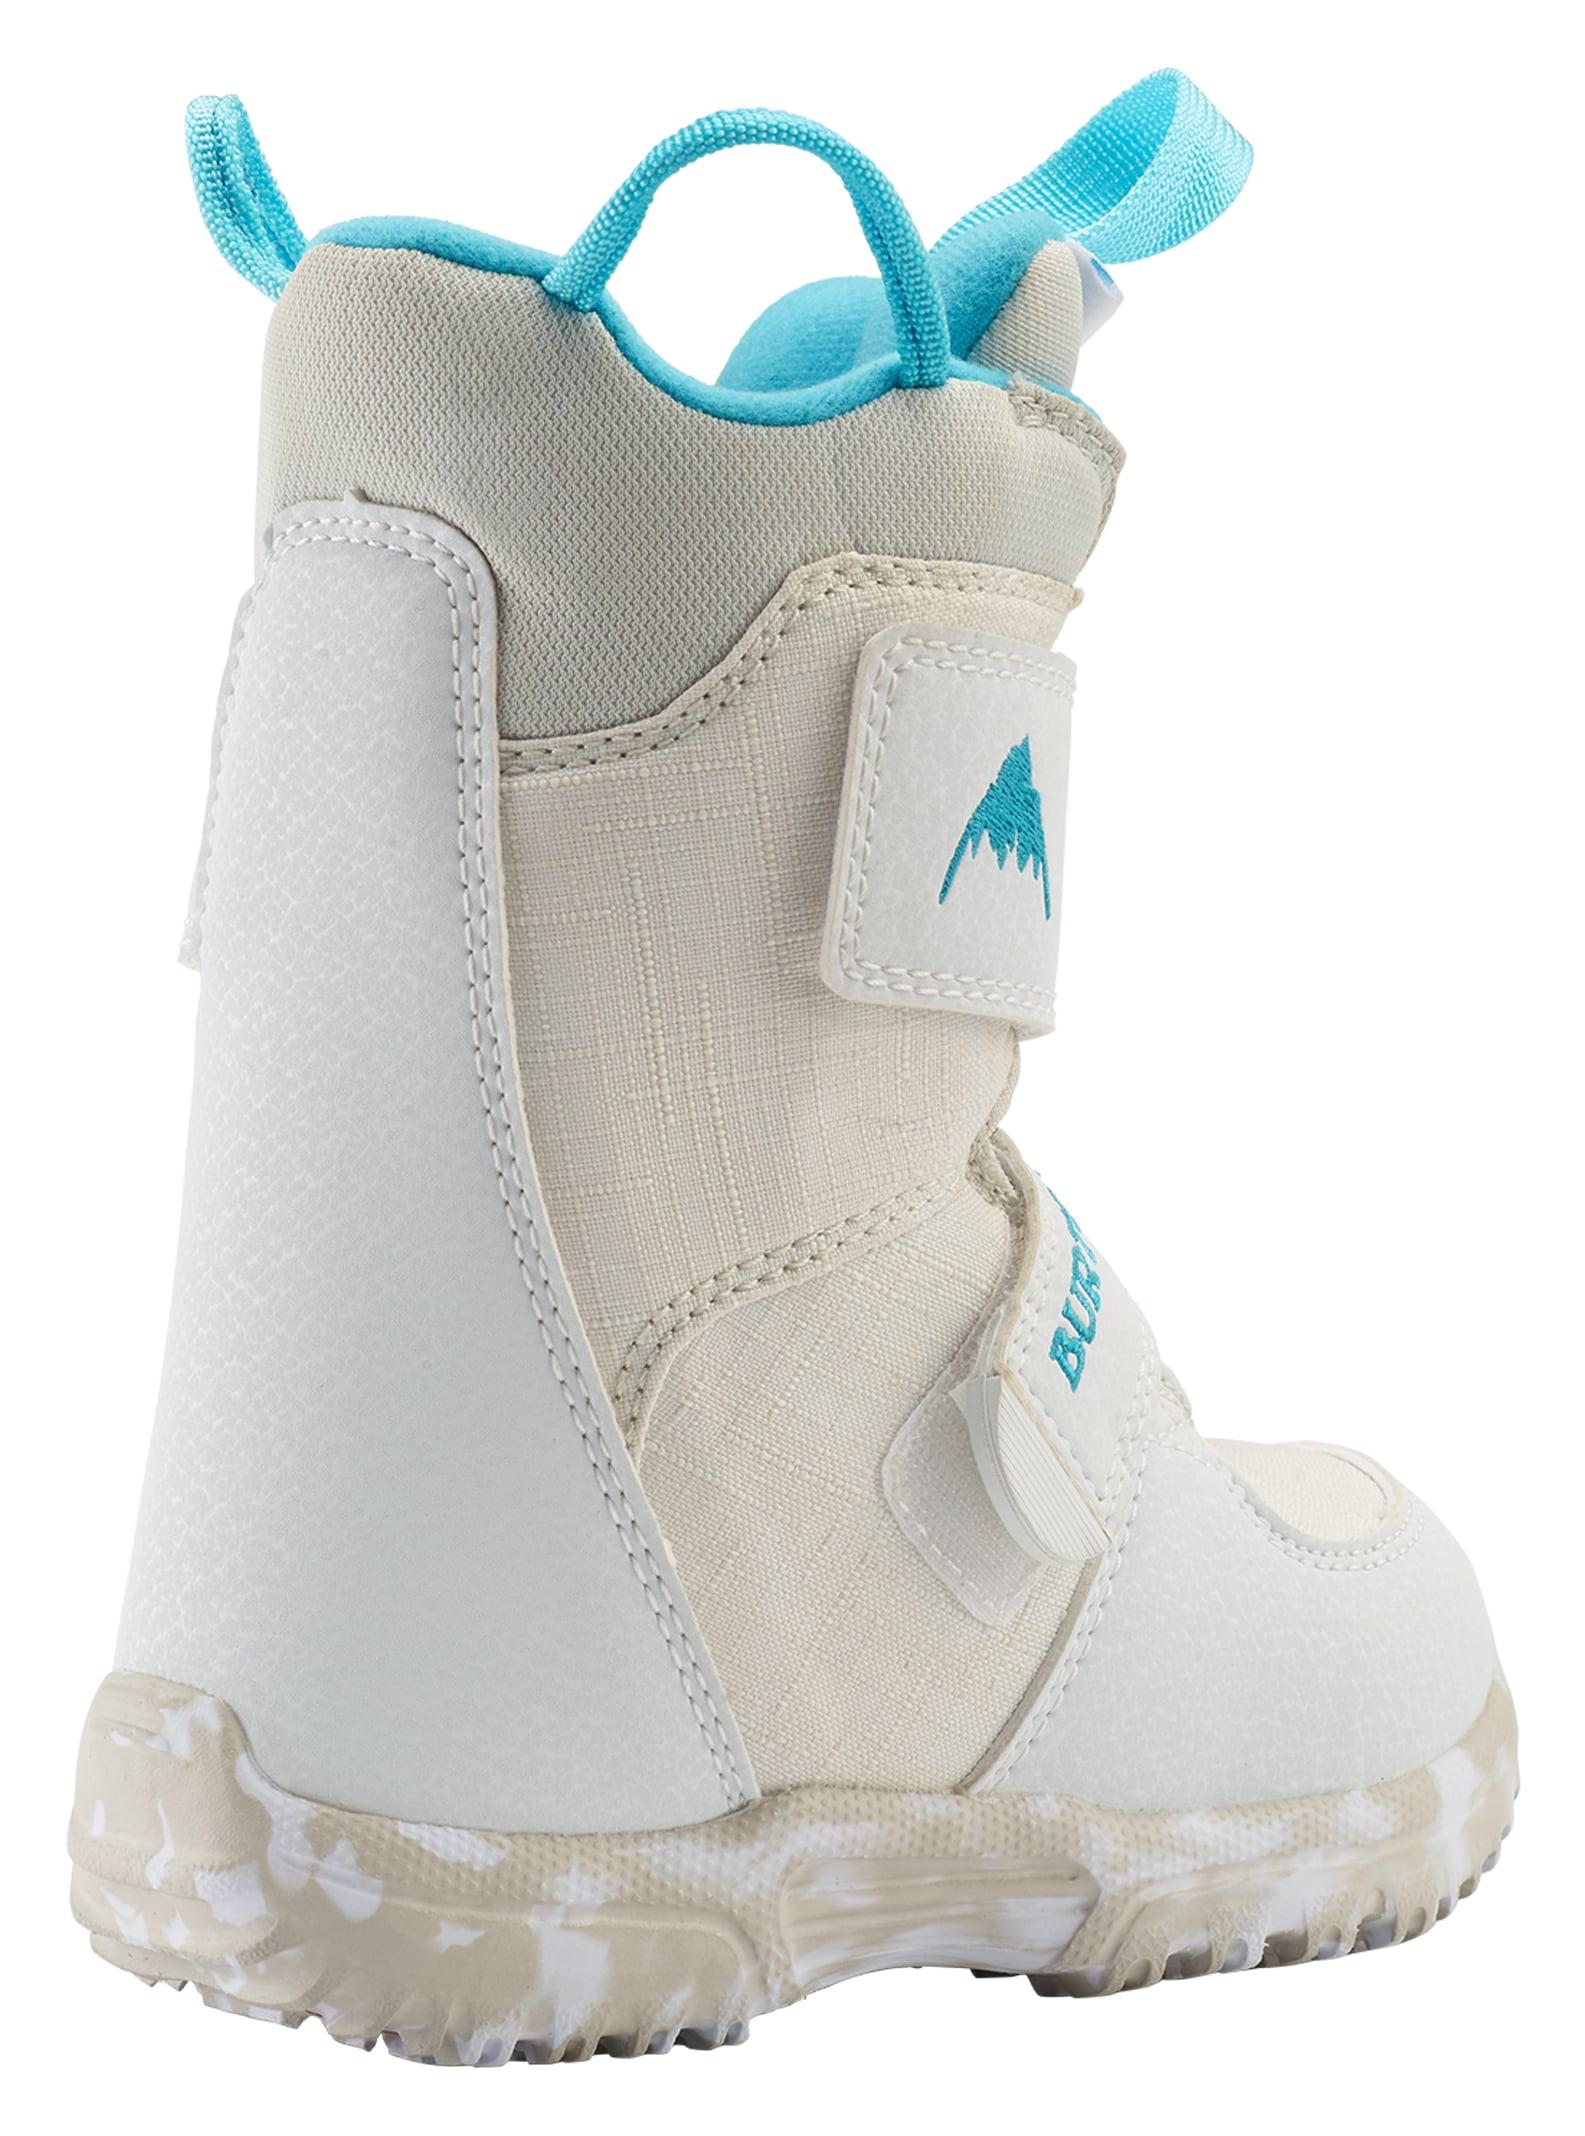 product image Toddlers' Mini Grom Snowboard Boots, White